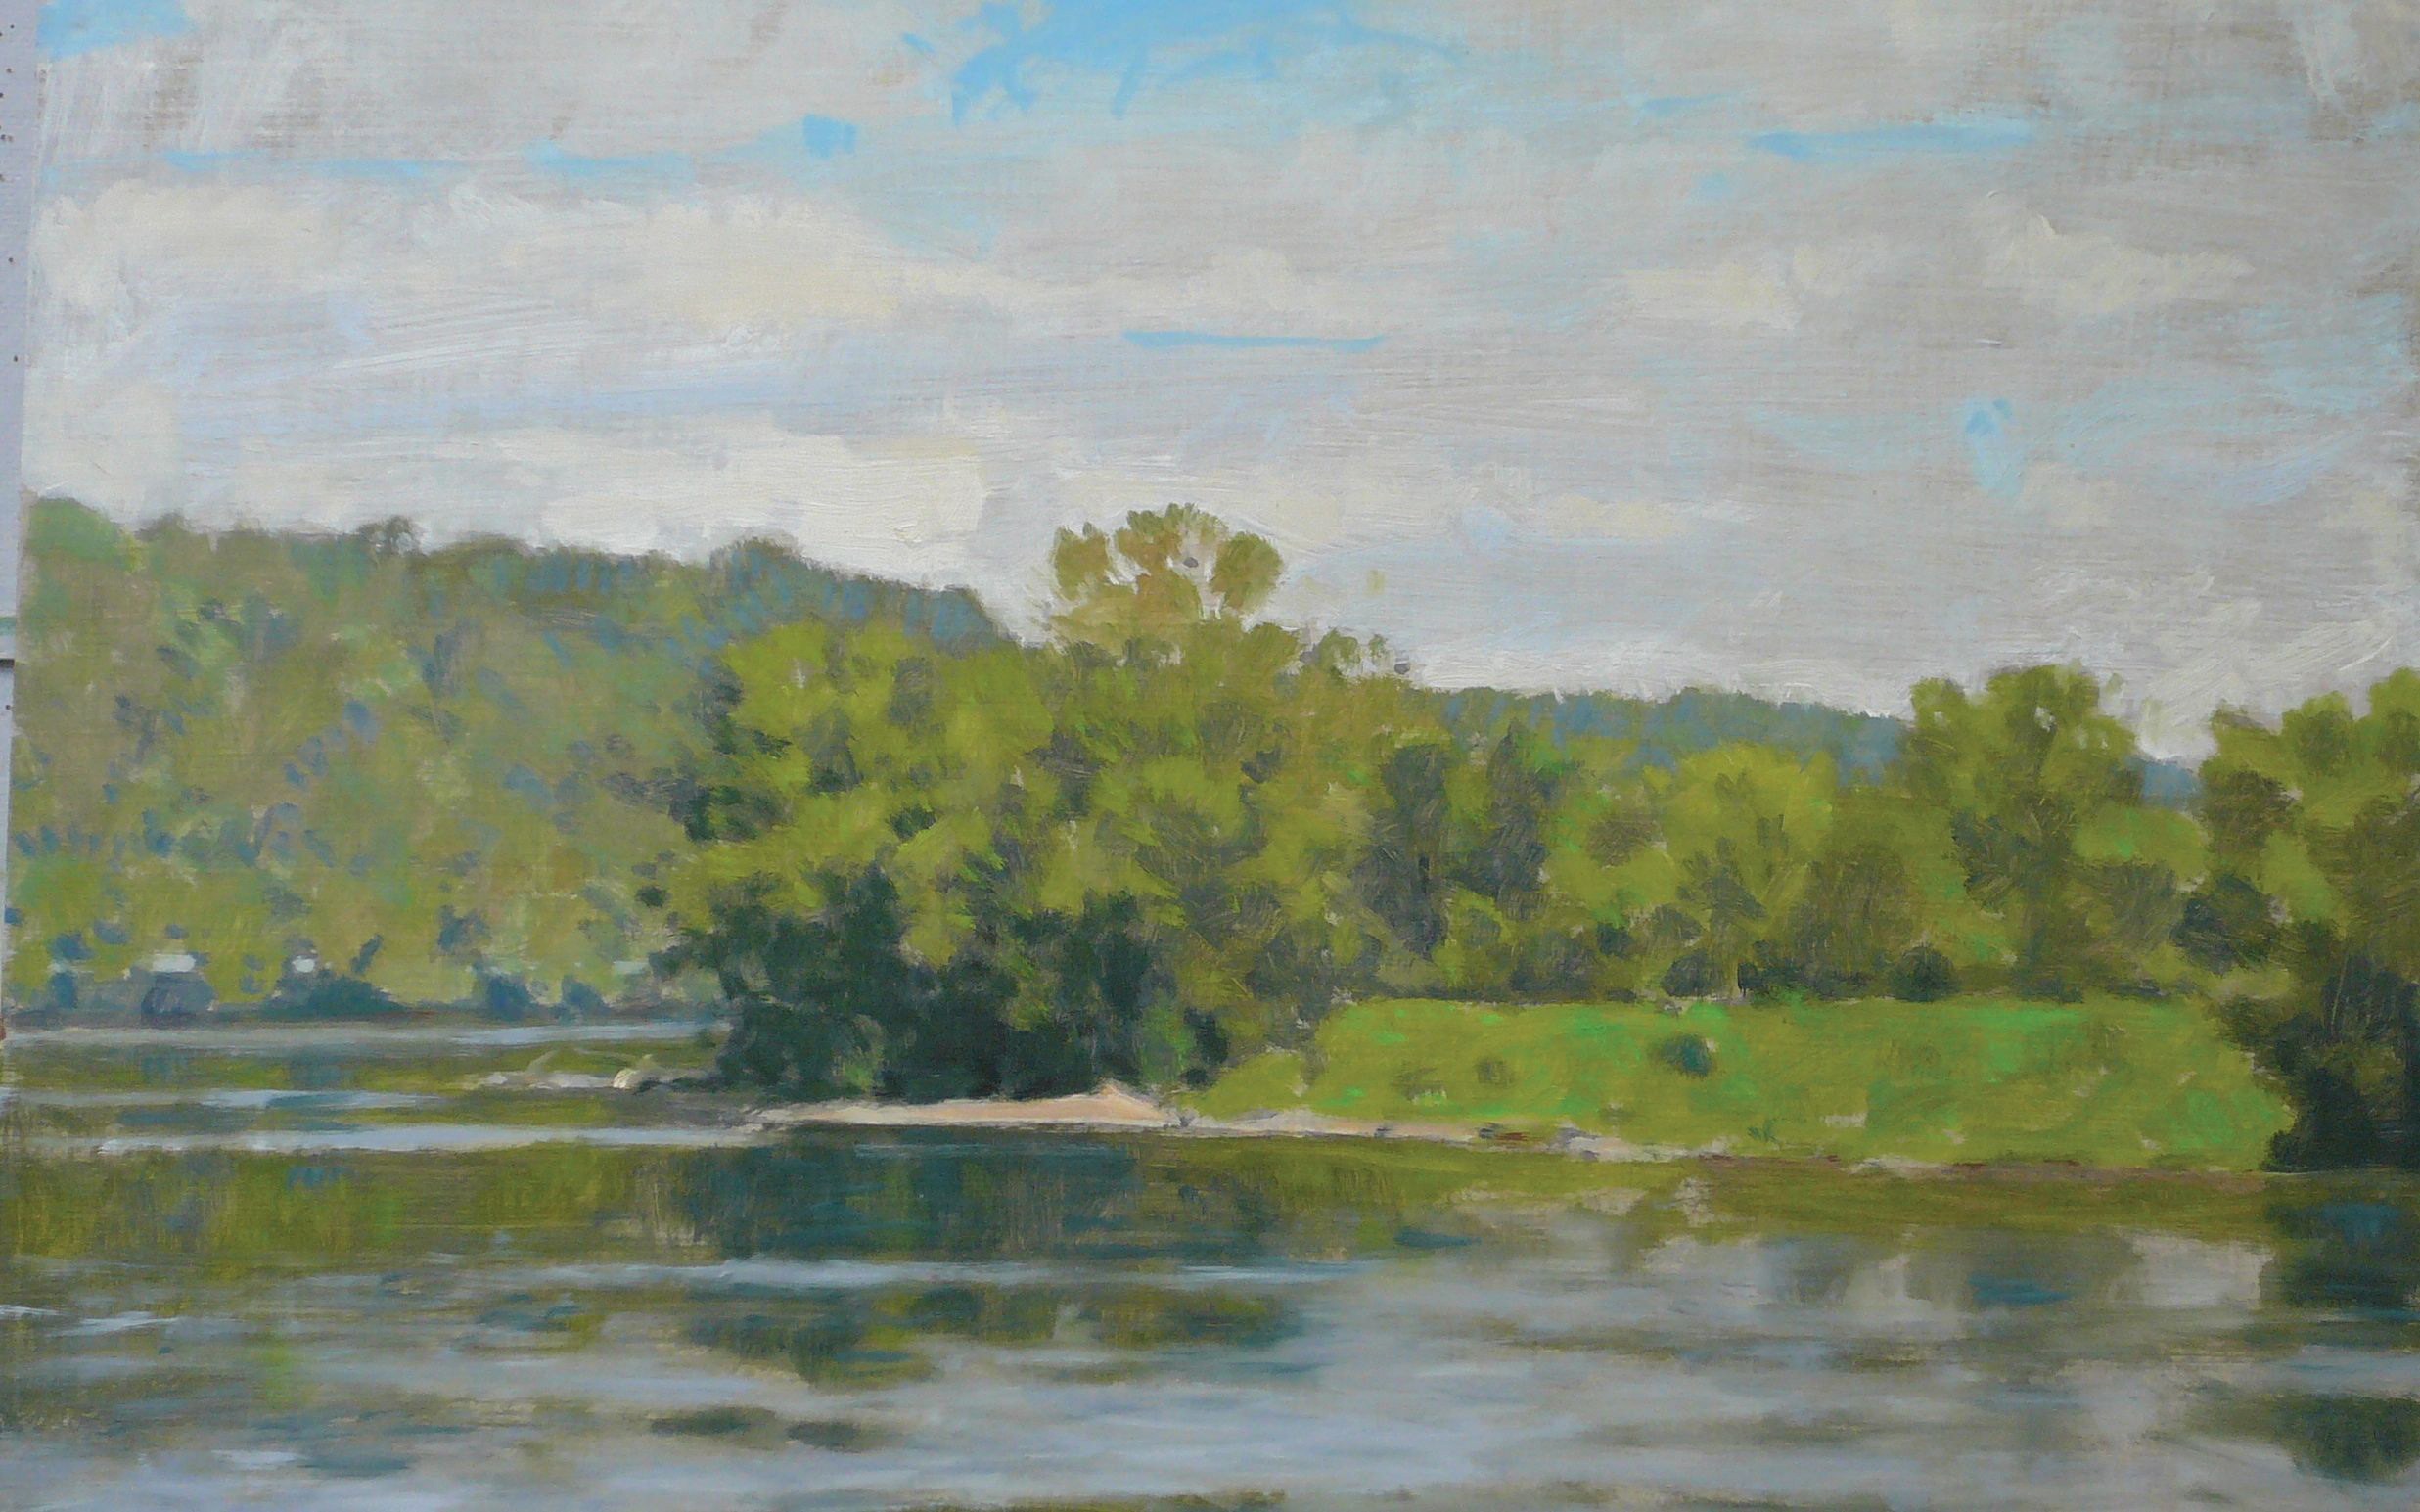 painting of trees lining a river